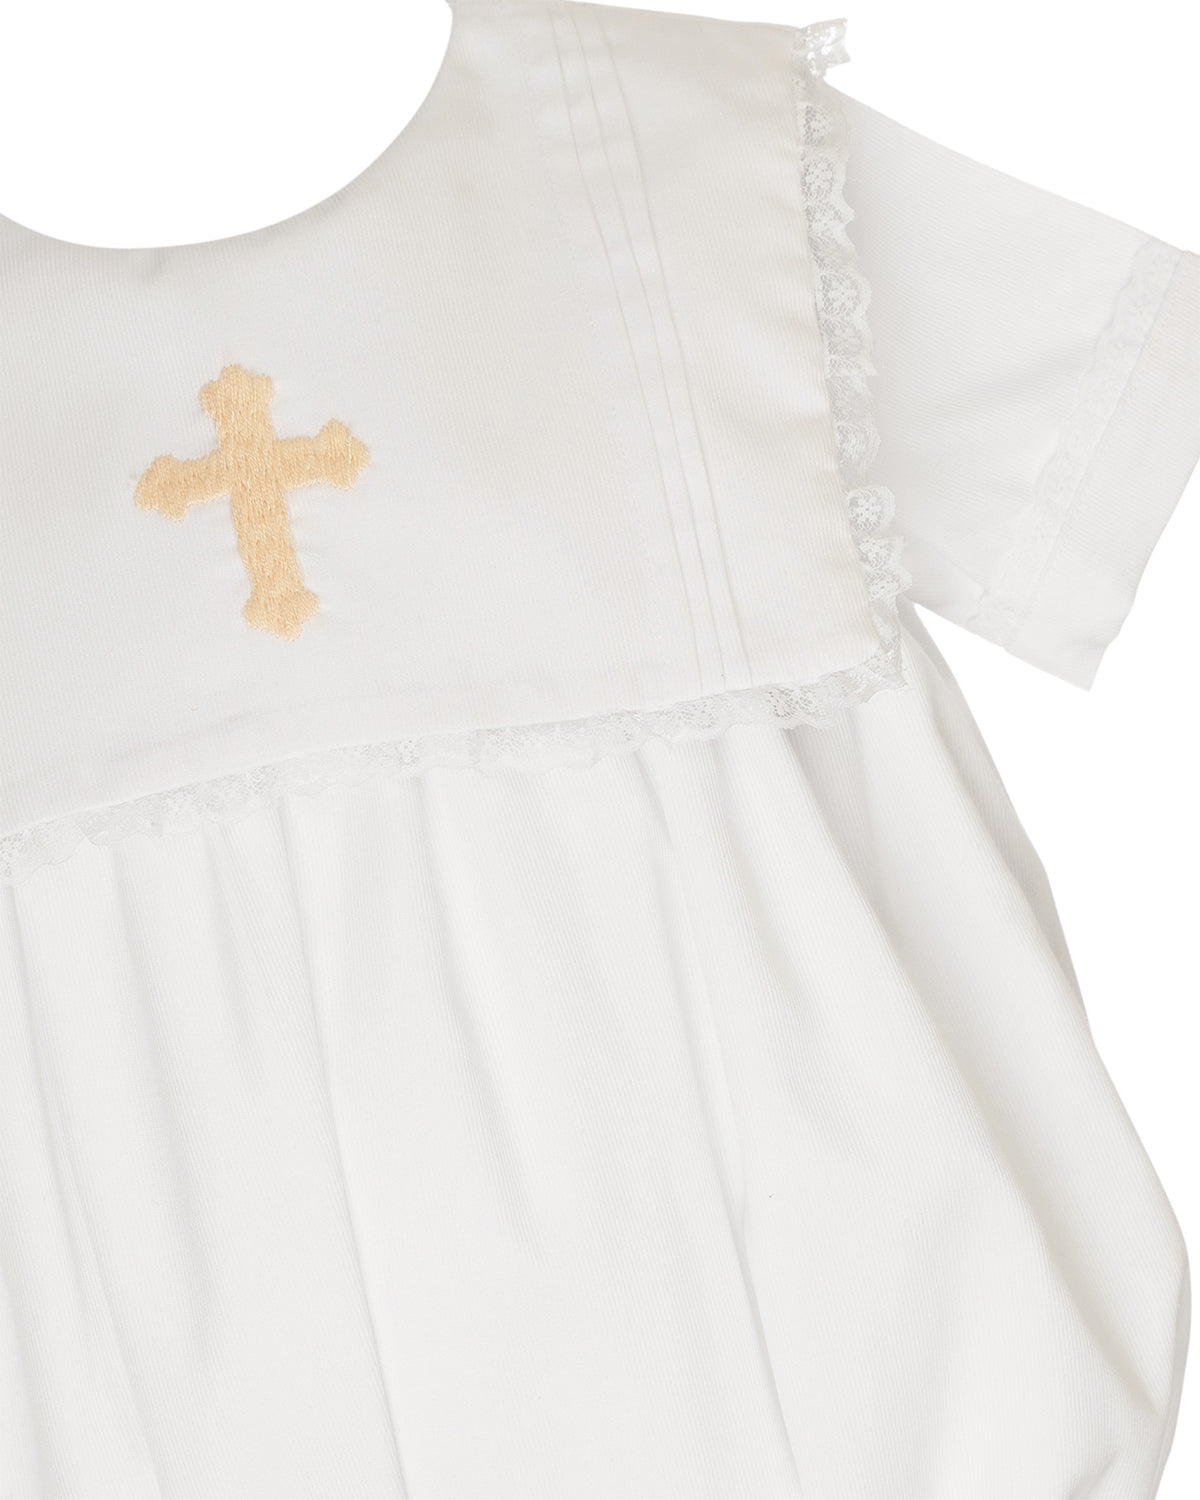 Cross Hand Embroidered Bubble with Bib Collar